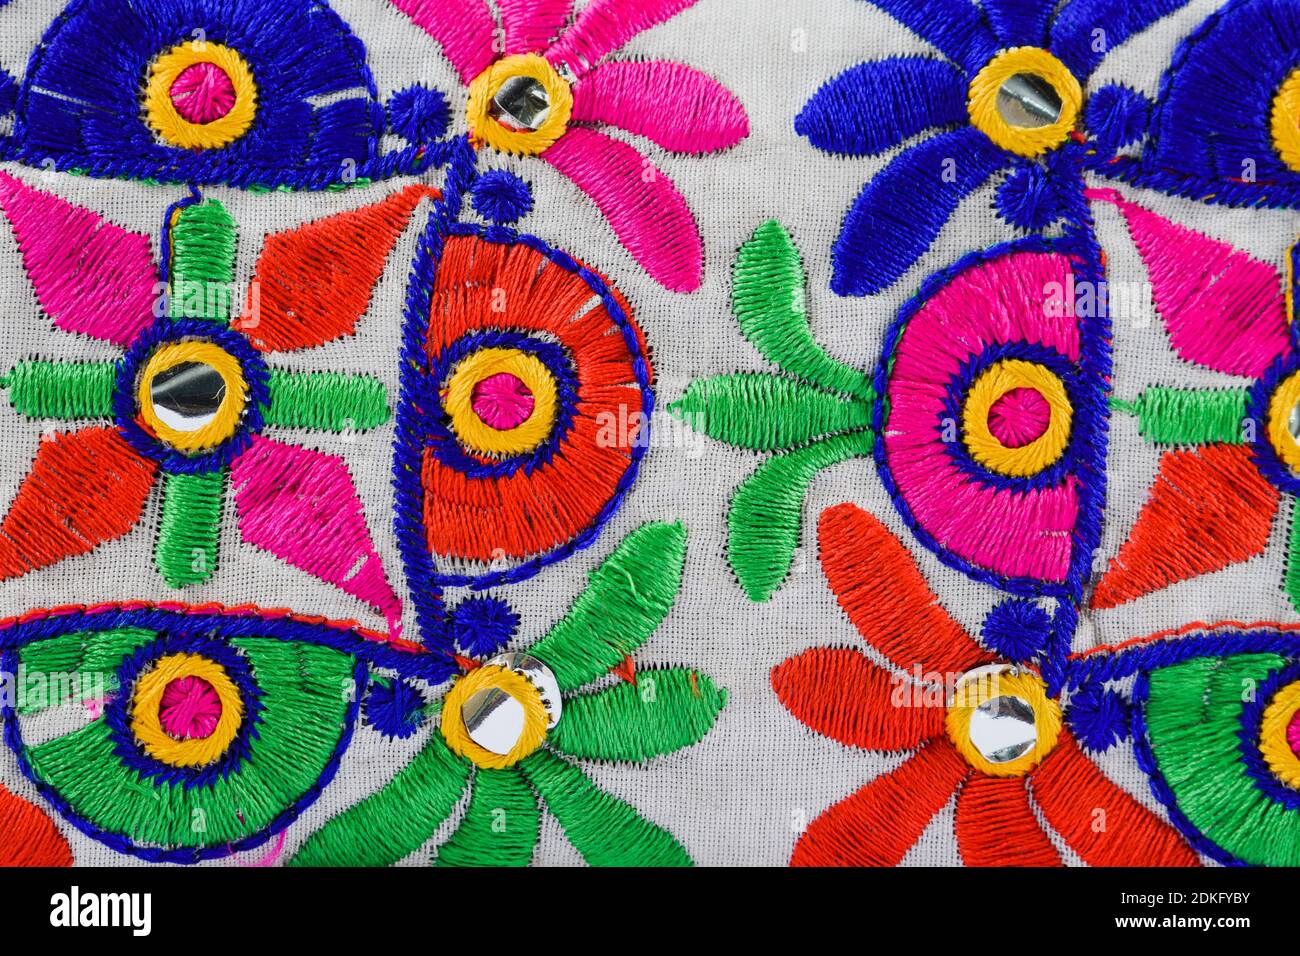 Colorful Kutchi embroidery on cloth woven weaving dont by artisans. Handmade thread works, mirror work from Gujarat, India Stock Photo